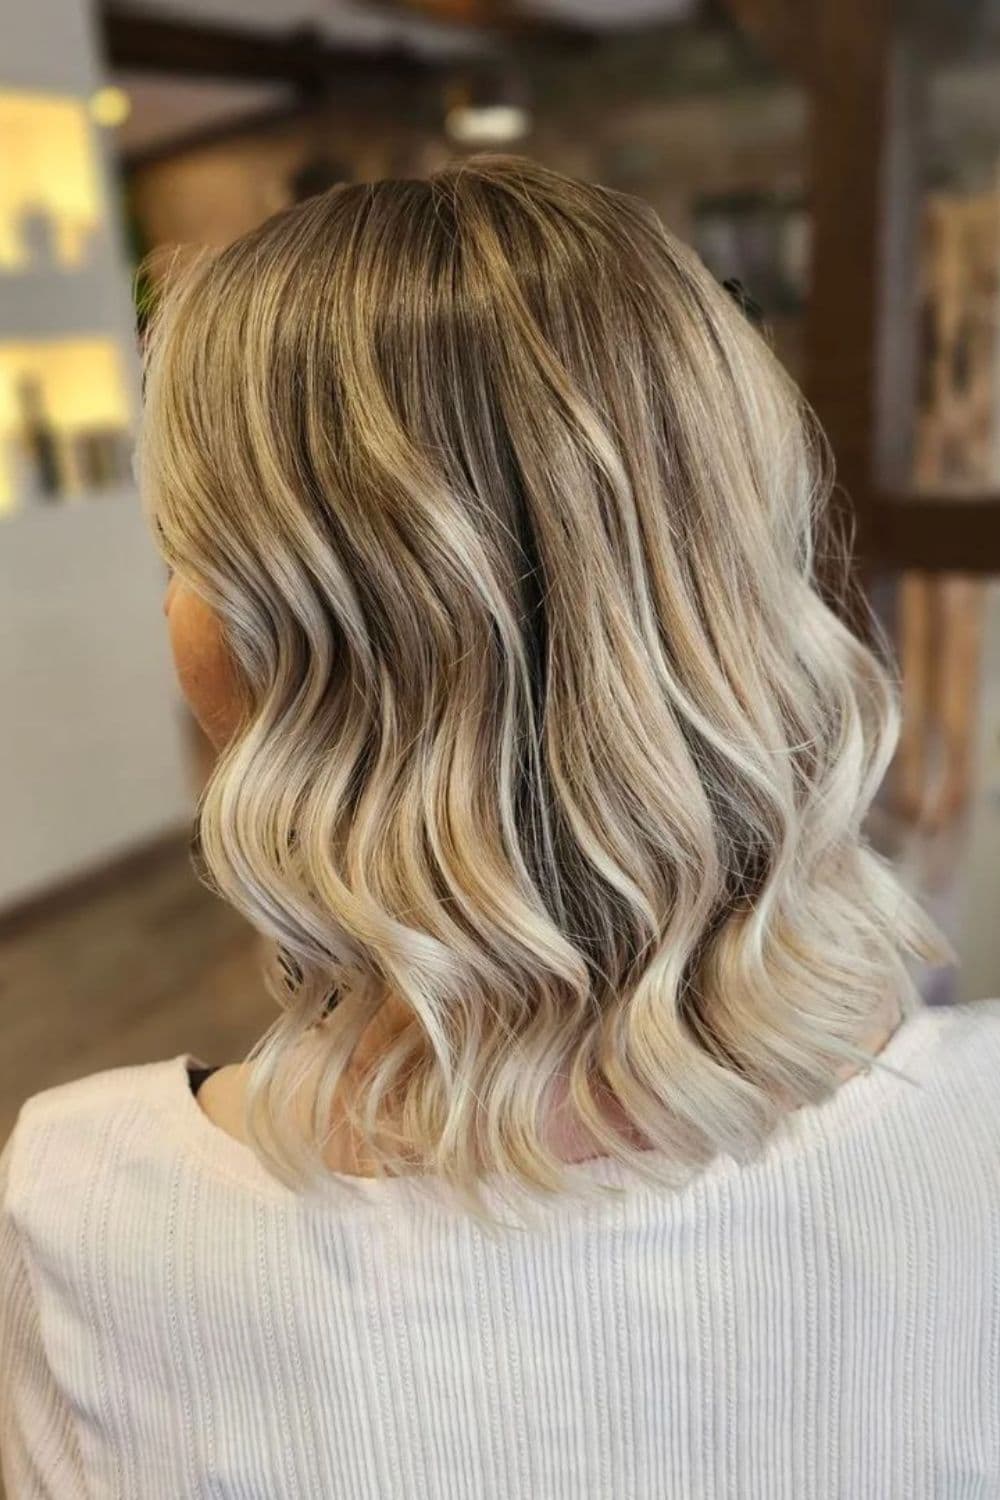 A woman with a wavy blonde and black balayage bob hair.